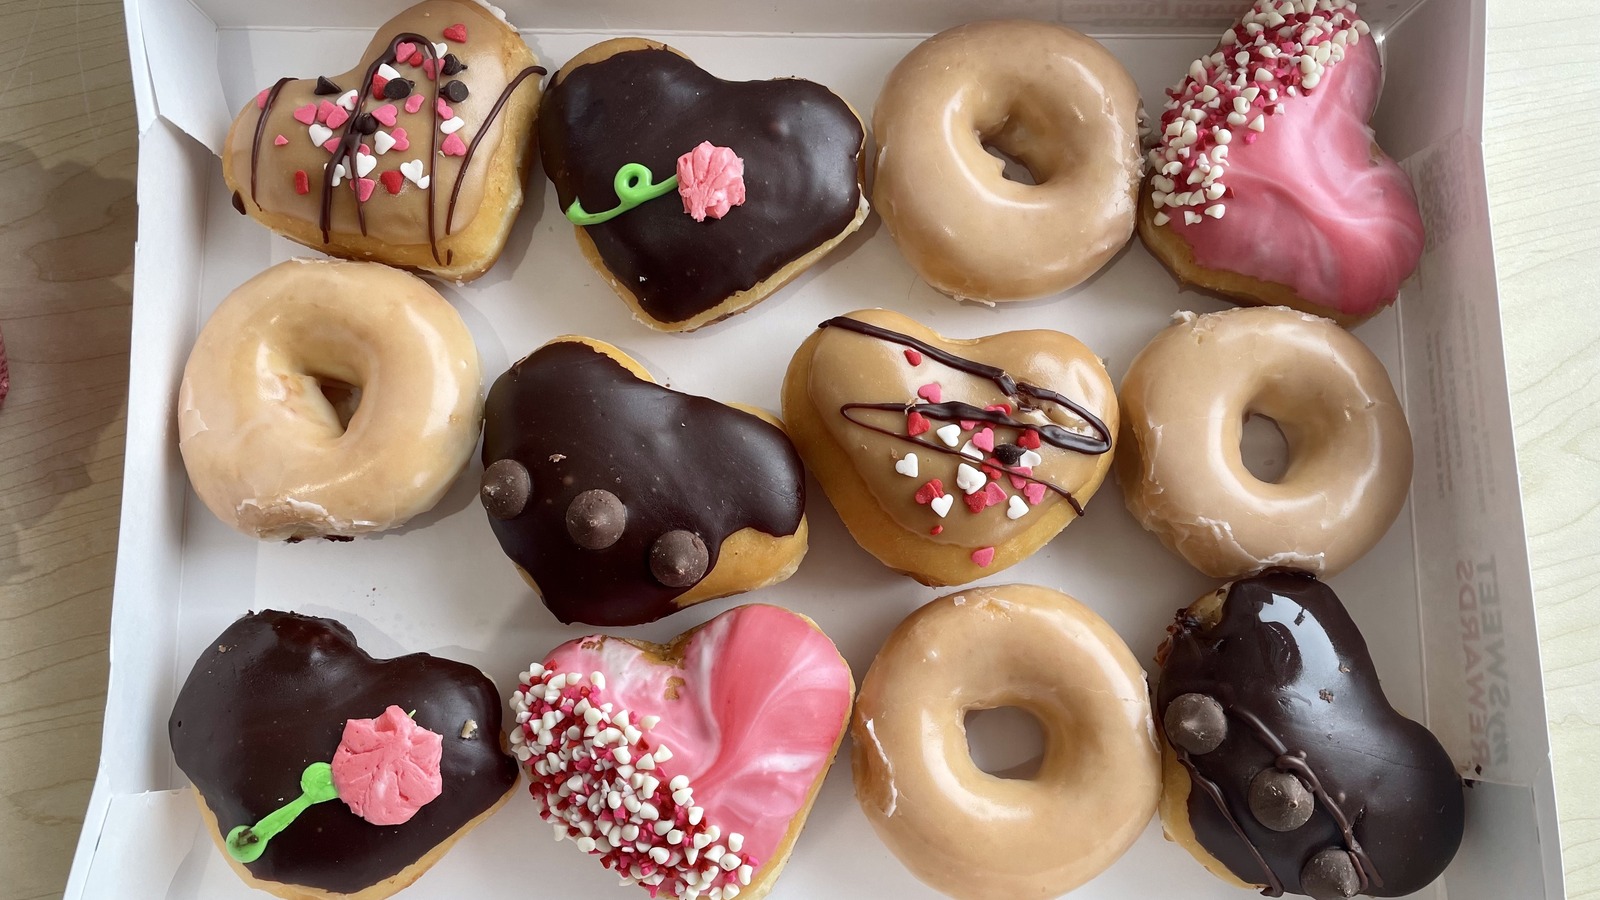 We Tried Krispy Kreme’s Valentine’s Day Doughnuts. They Don’t Quite Pull At Our Heartstrings – Mashed